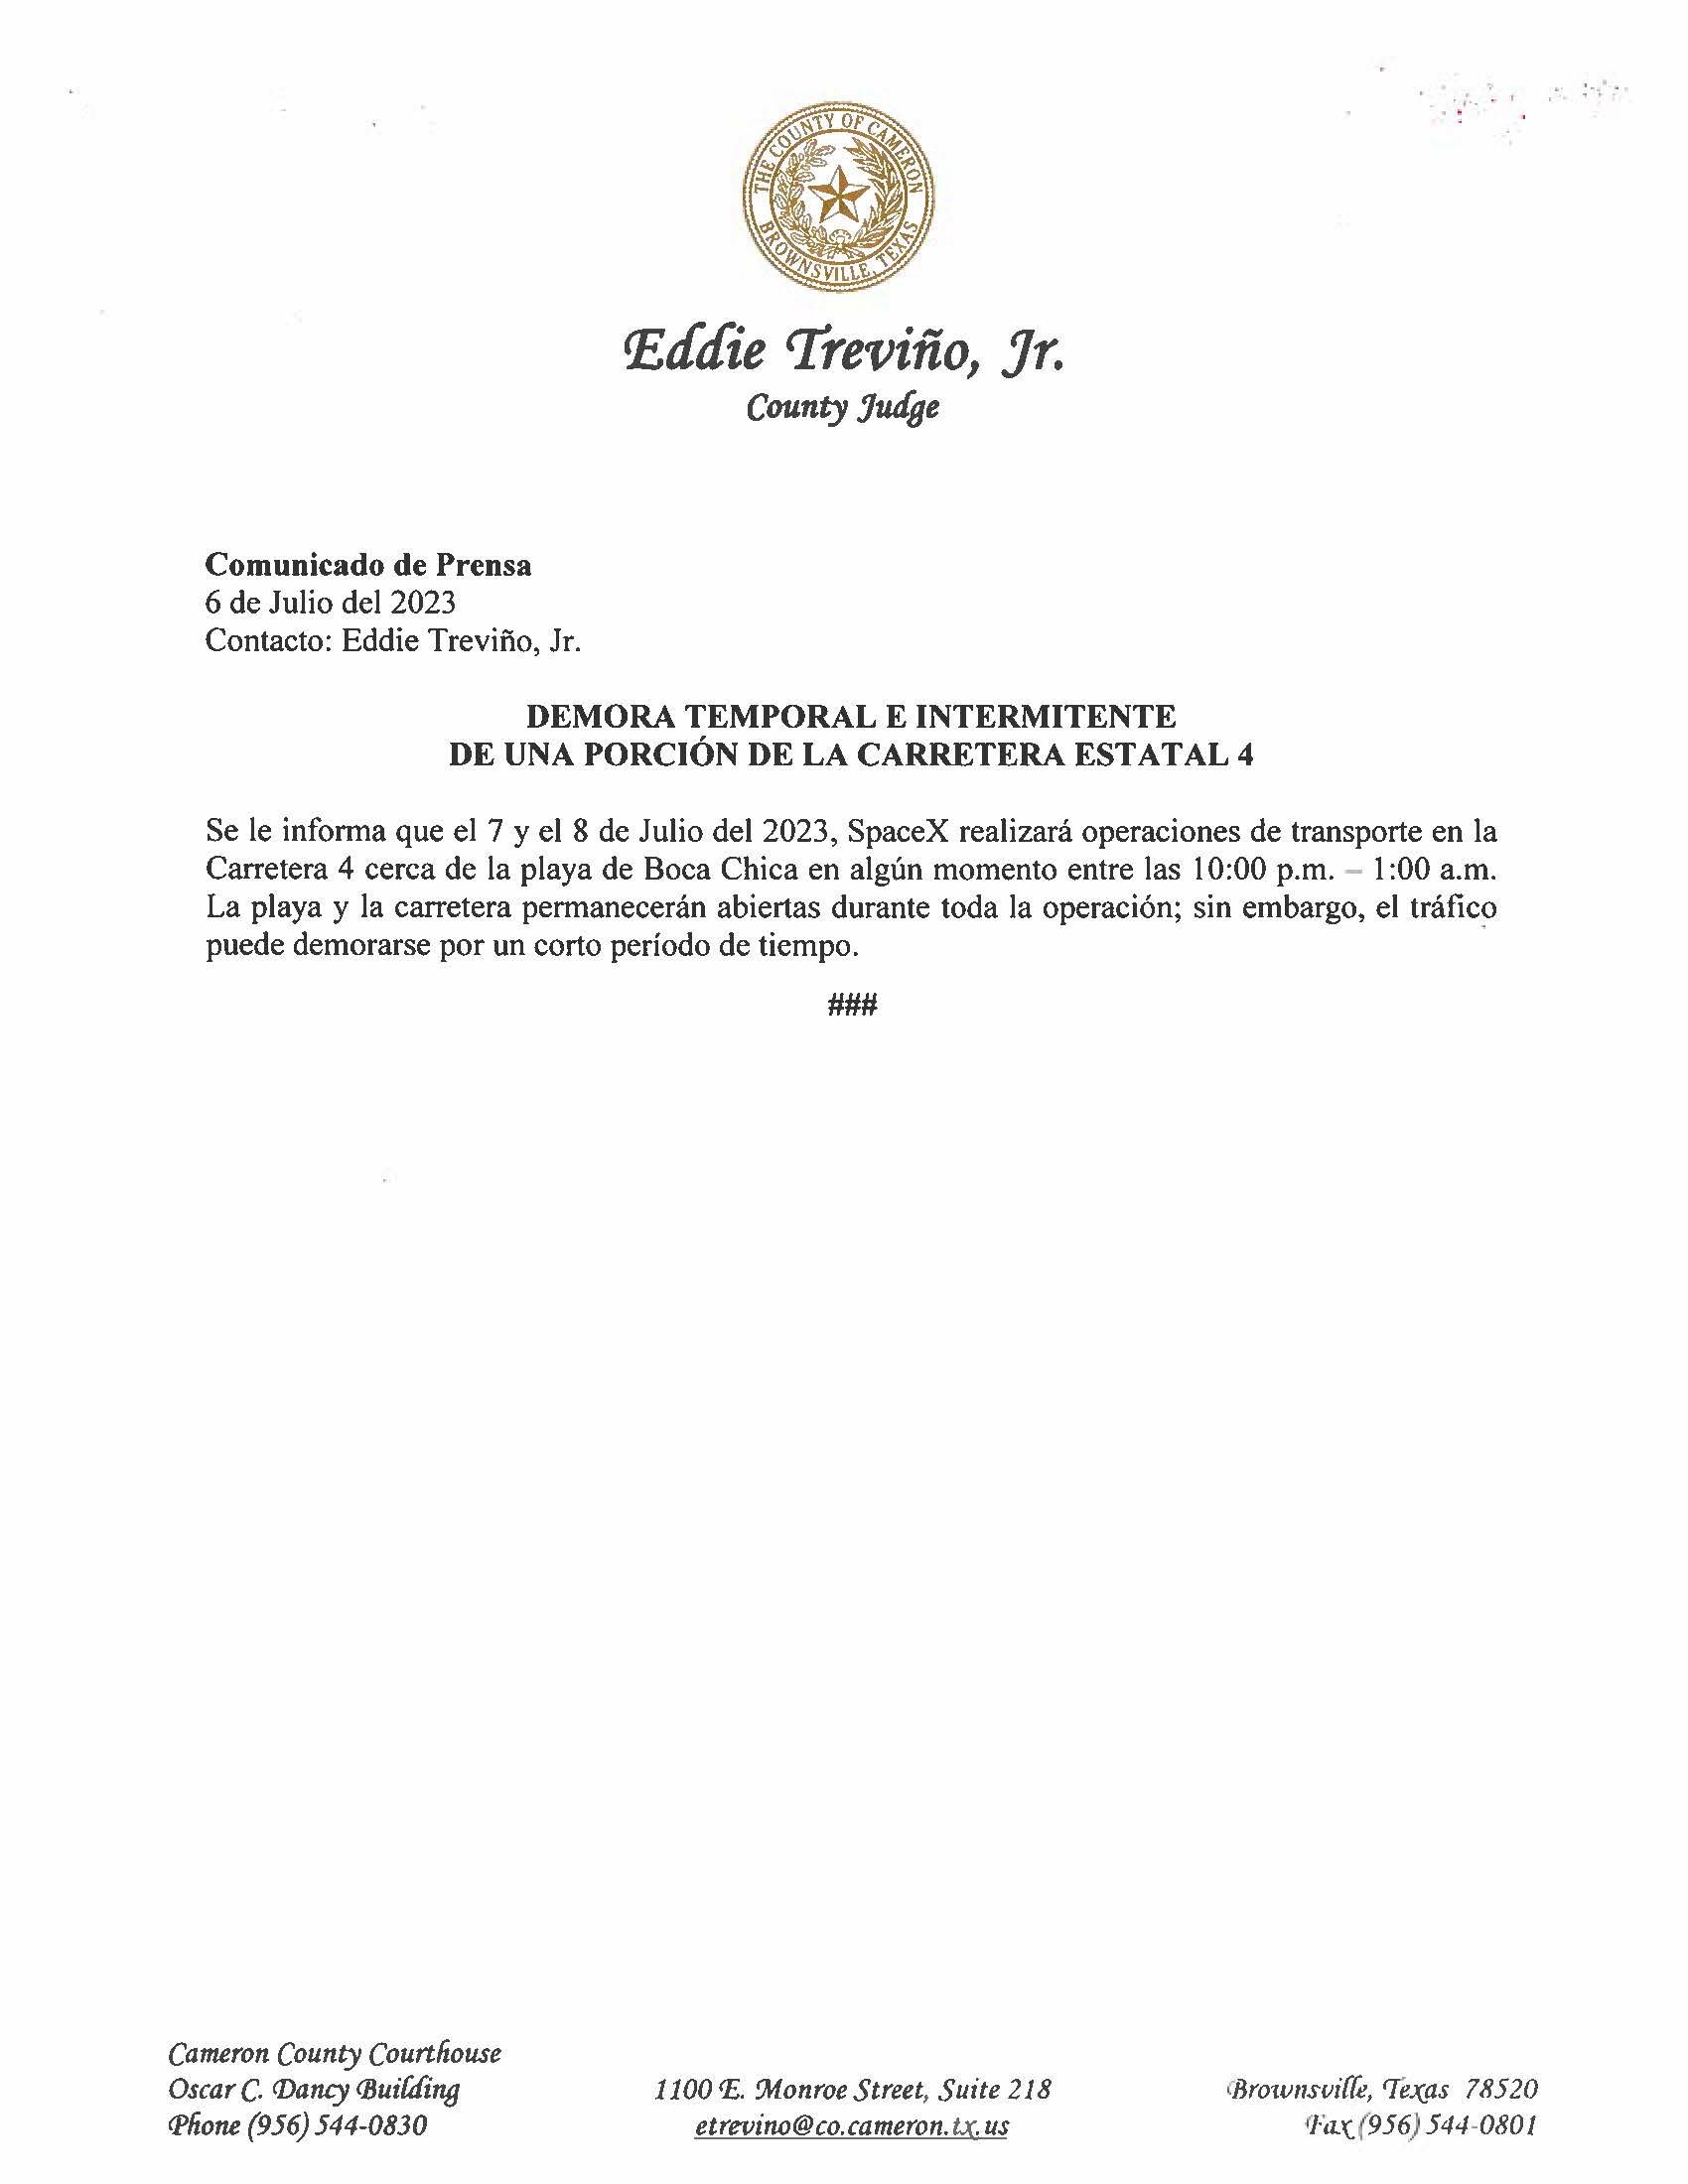 Press Release In English And Spanish.07.07.2023 Page 2